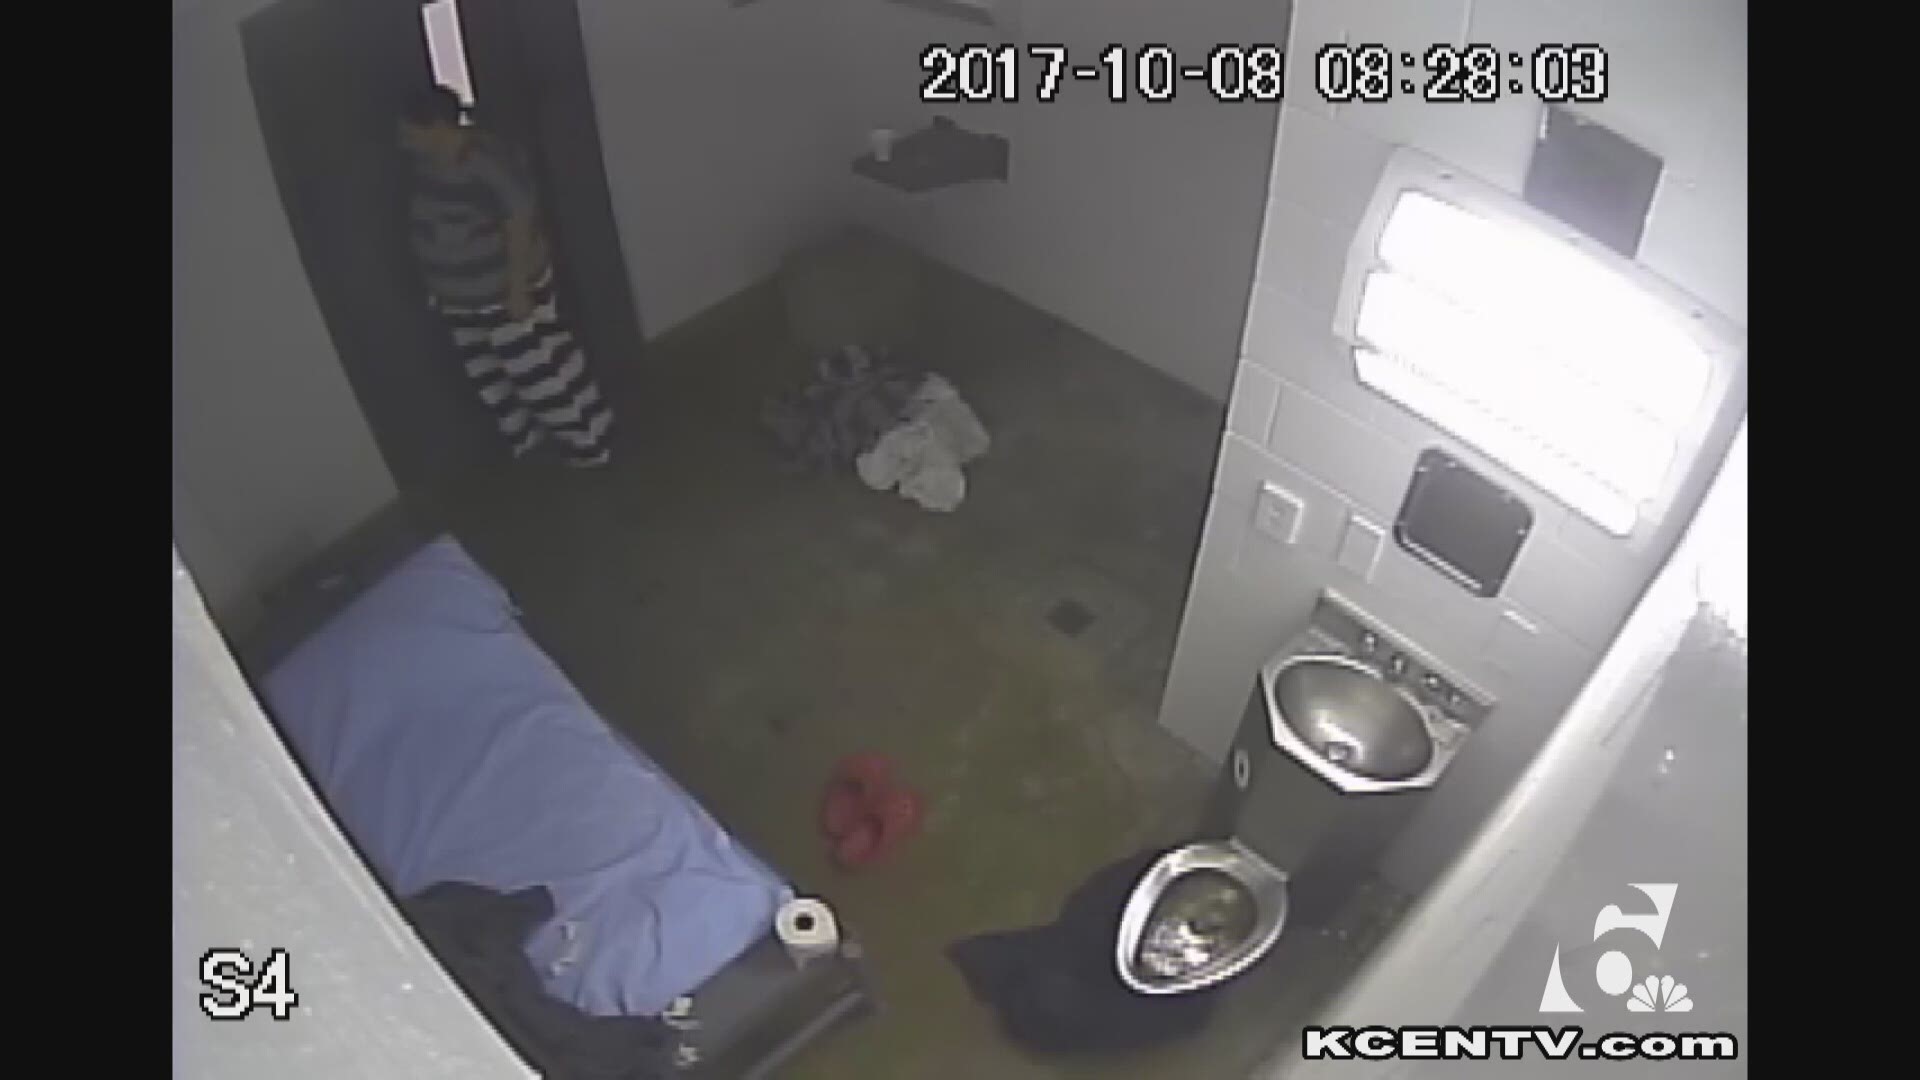 KCEN Channel 6 obtained footage of the confrontation that led to Kelli Page's death after her family sued the Coryell County Jail.